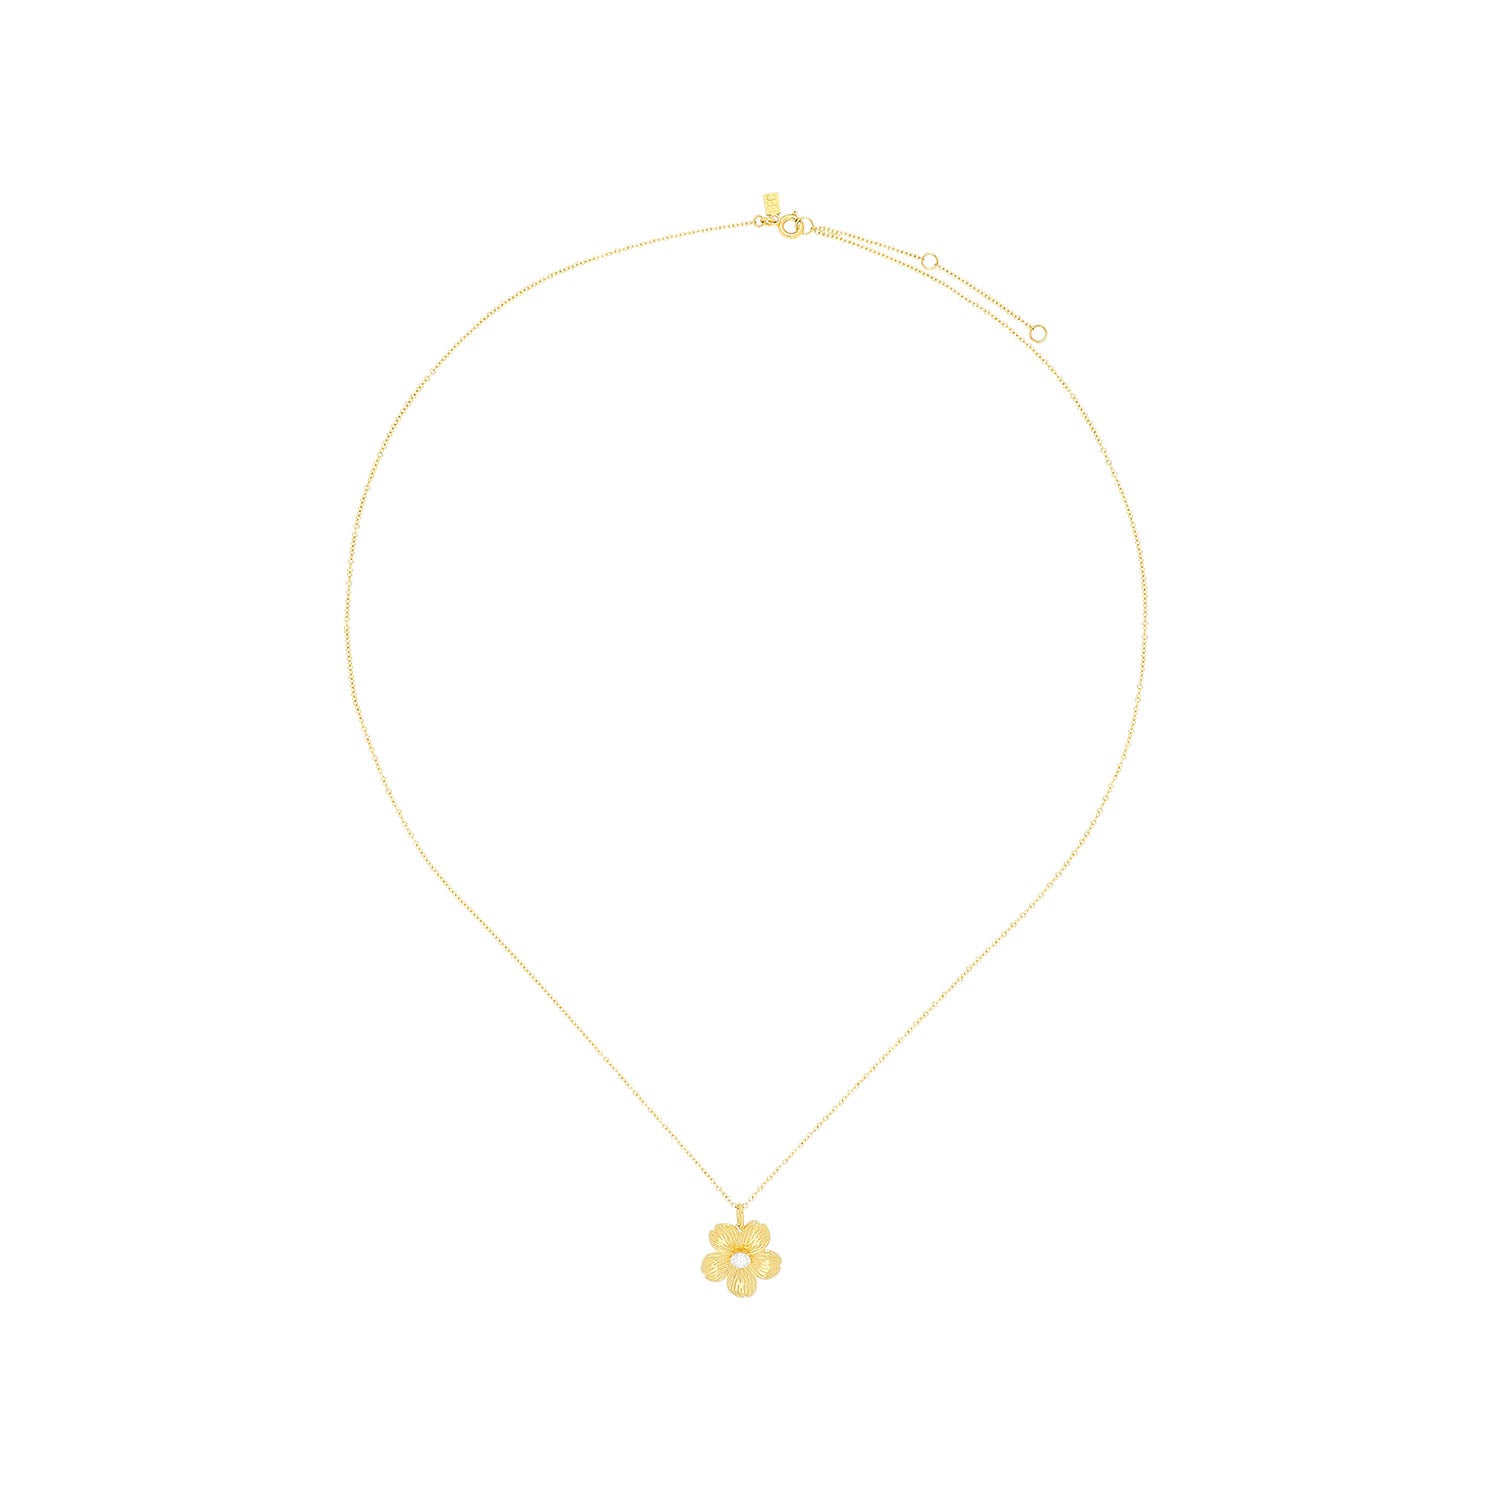 Cherry Blossom Necklace in 14k yellow gold